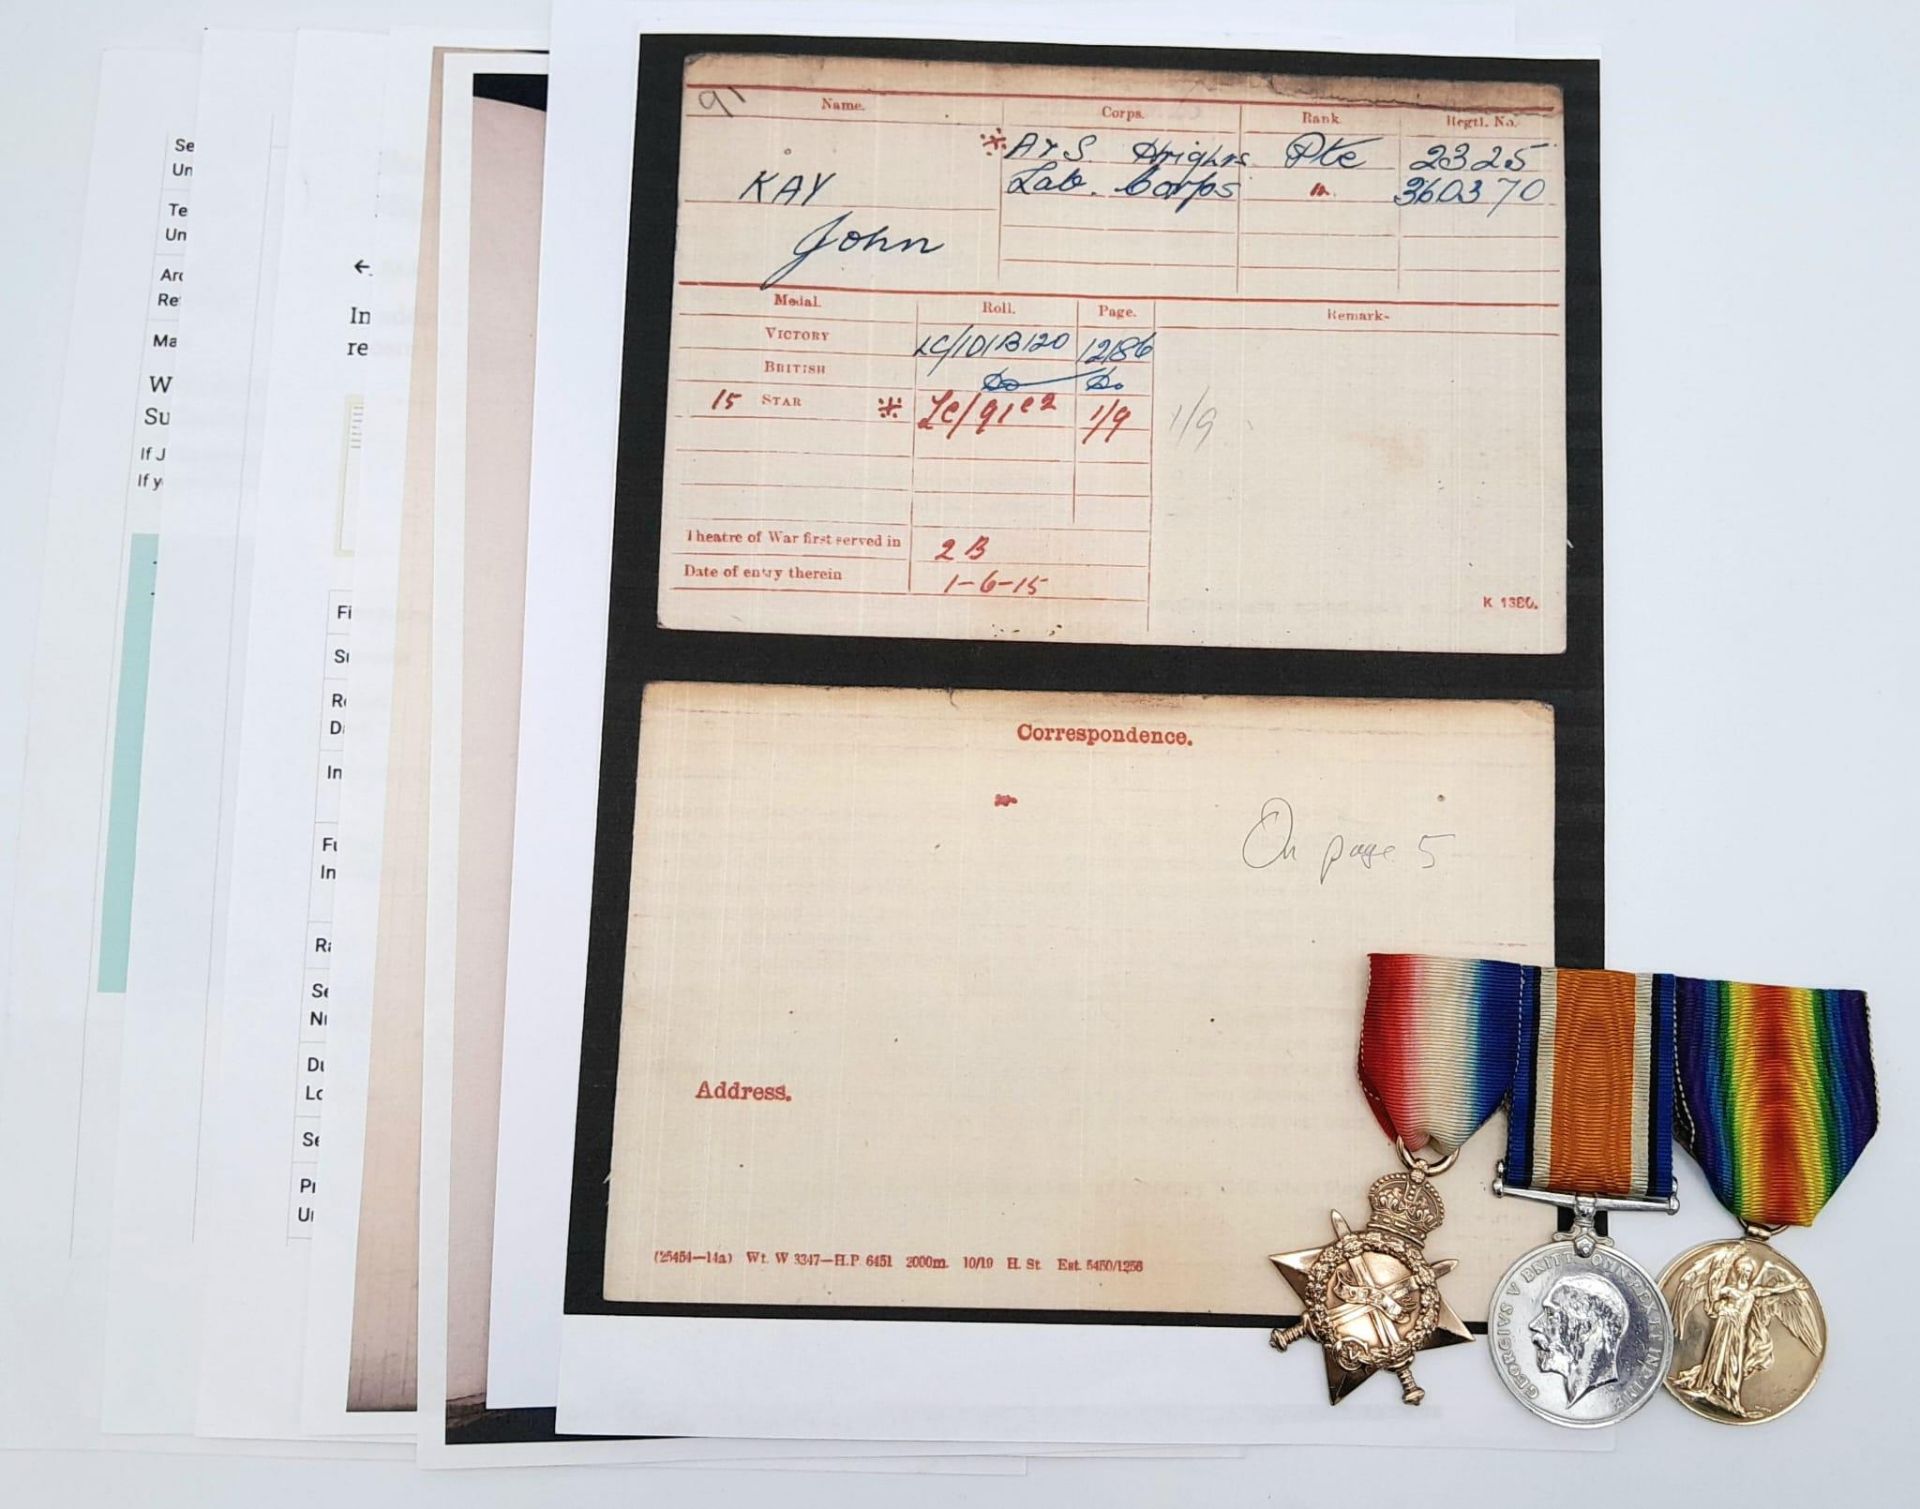 A 1914/15 Trio consisting of the 1914/15 Star, British War Medal and Victory Medal, all named to: